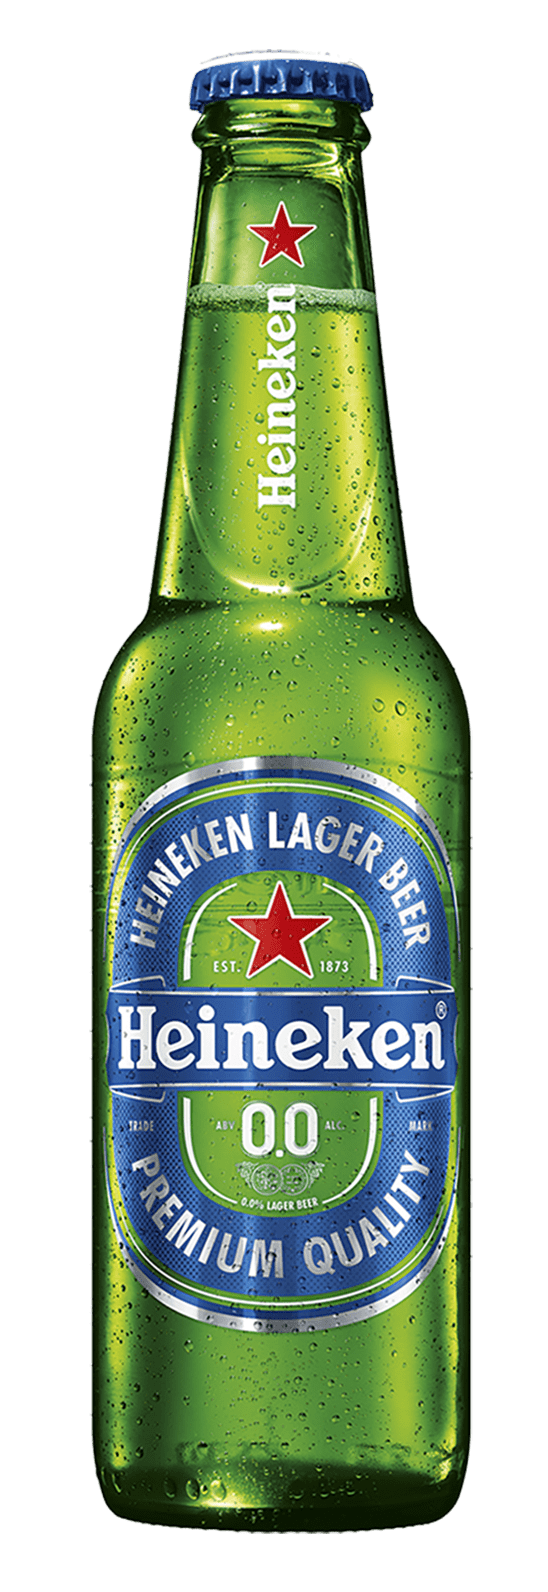 Heineken 0.0% is a non-alcoholic lager with a world-class taste